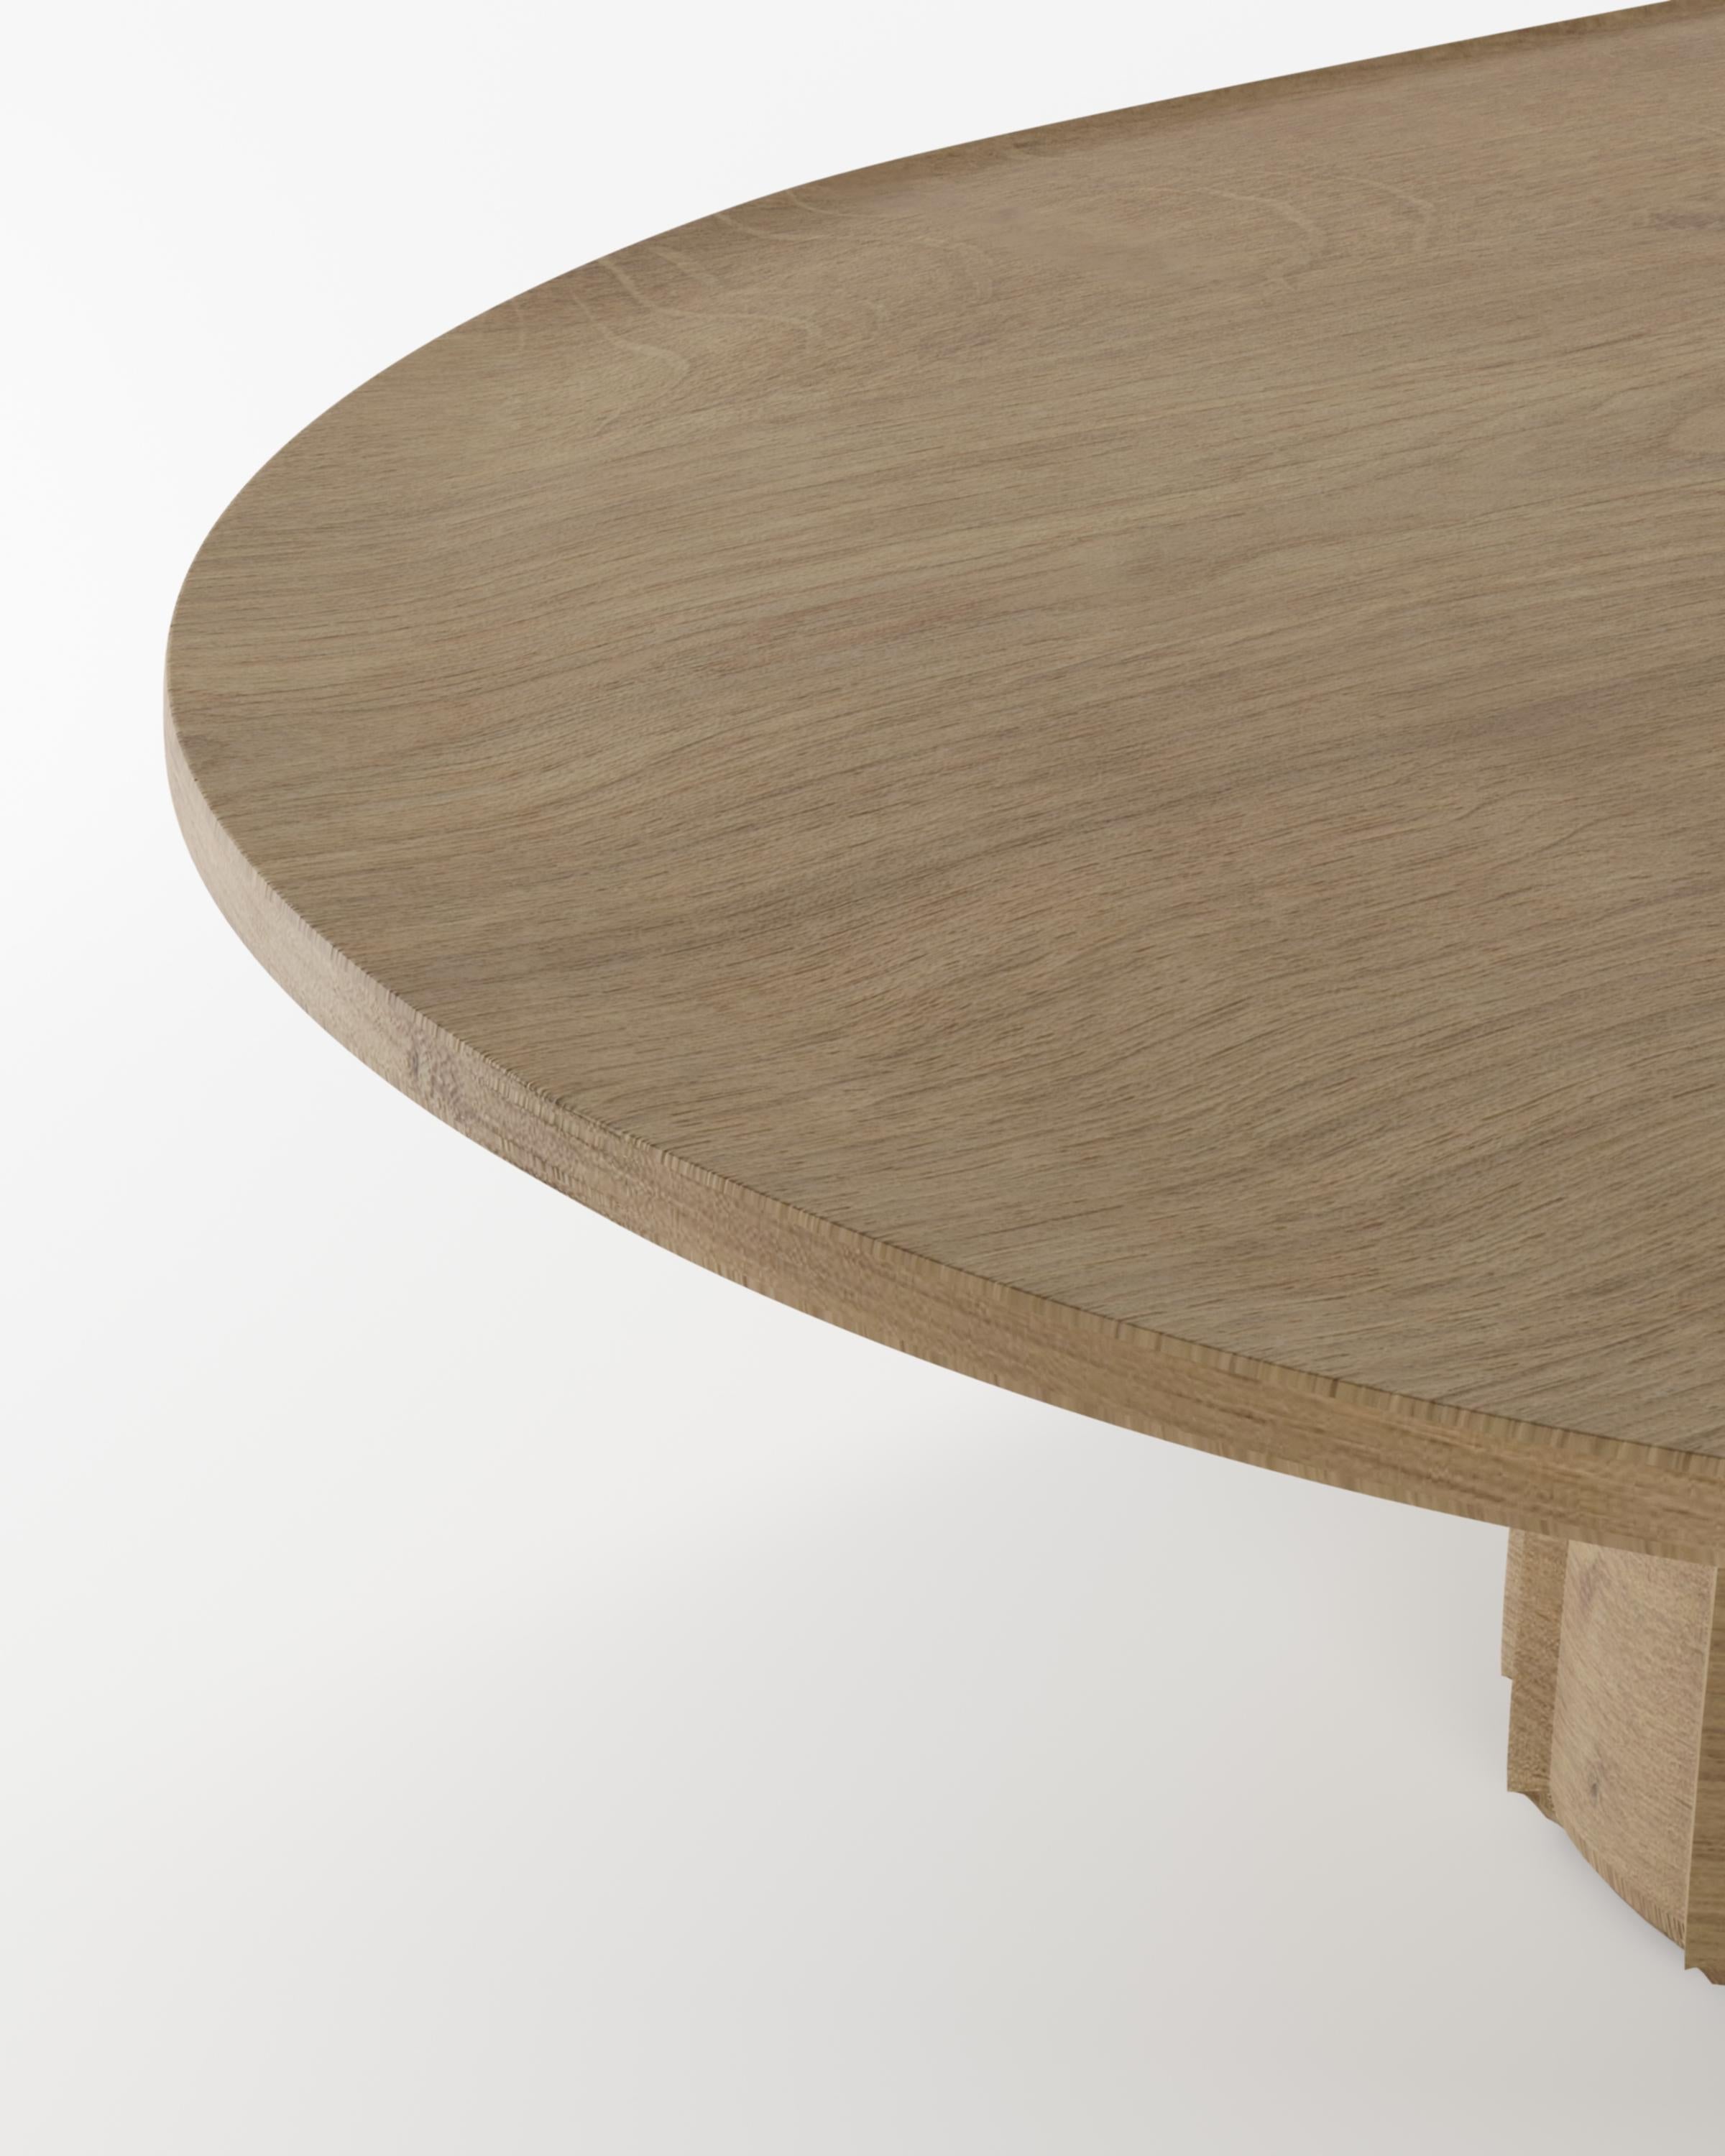 Collector- 21st Century Designed by Alter Ego Djembe Center Table Lacquered Smoked Oak

DIMENSIONS:
W 180 cm  70,8”
D 70 cm  27,5”
H 31 cm  12,2”


PRODUCT FEATURES
Oak

PRODUCT OPTIONS
Available in all COLLECTOR wood swatches
Available to be